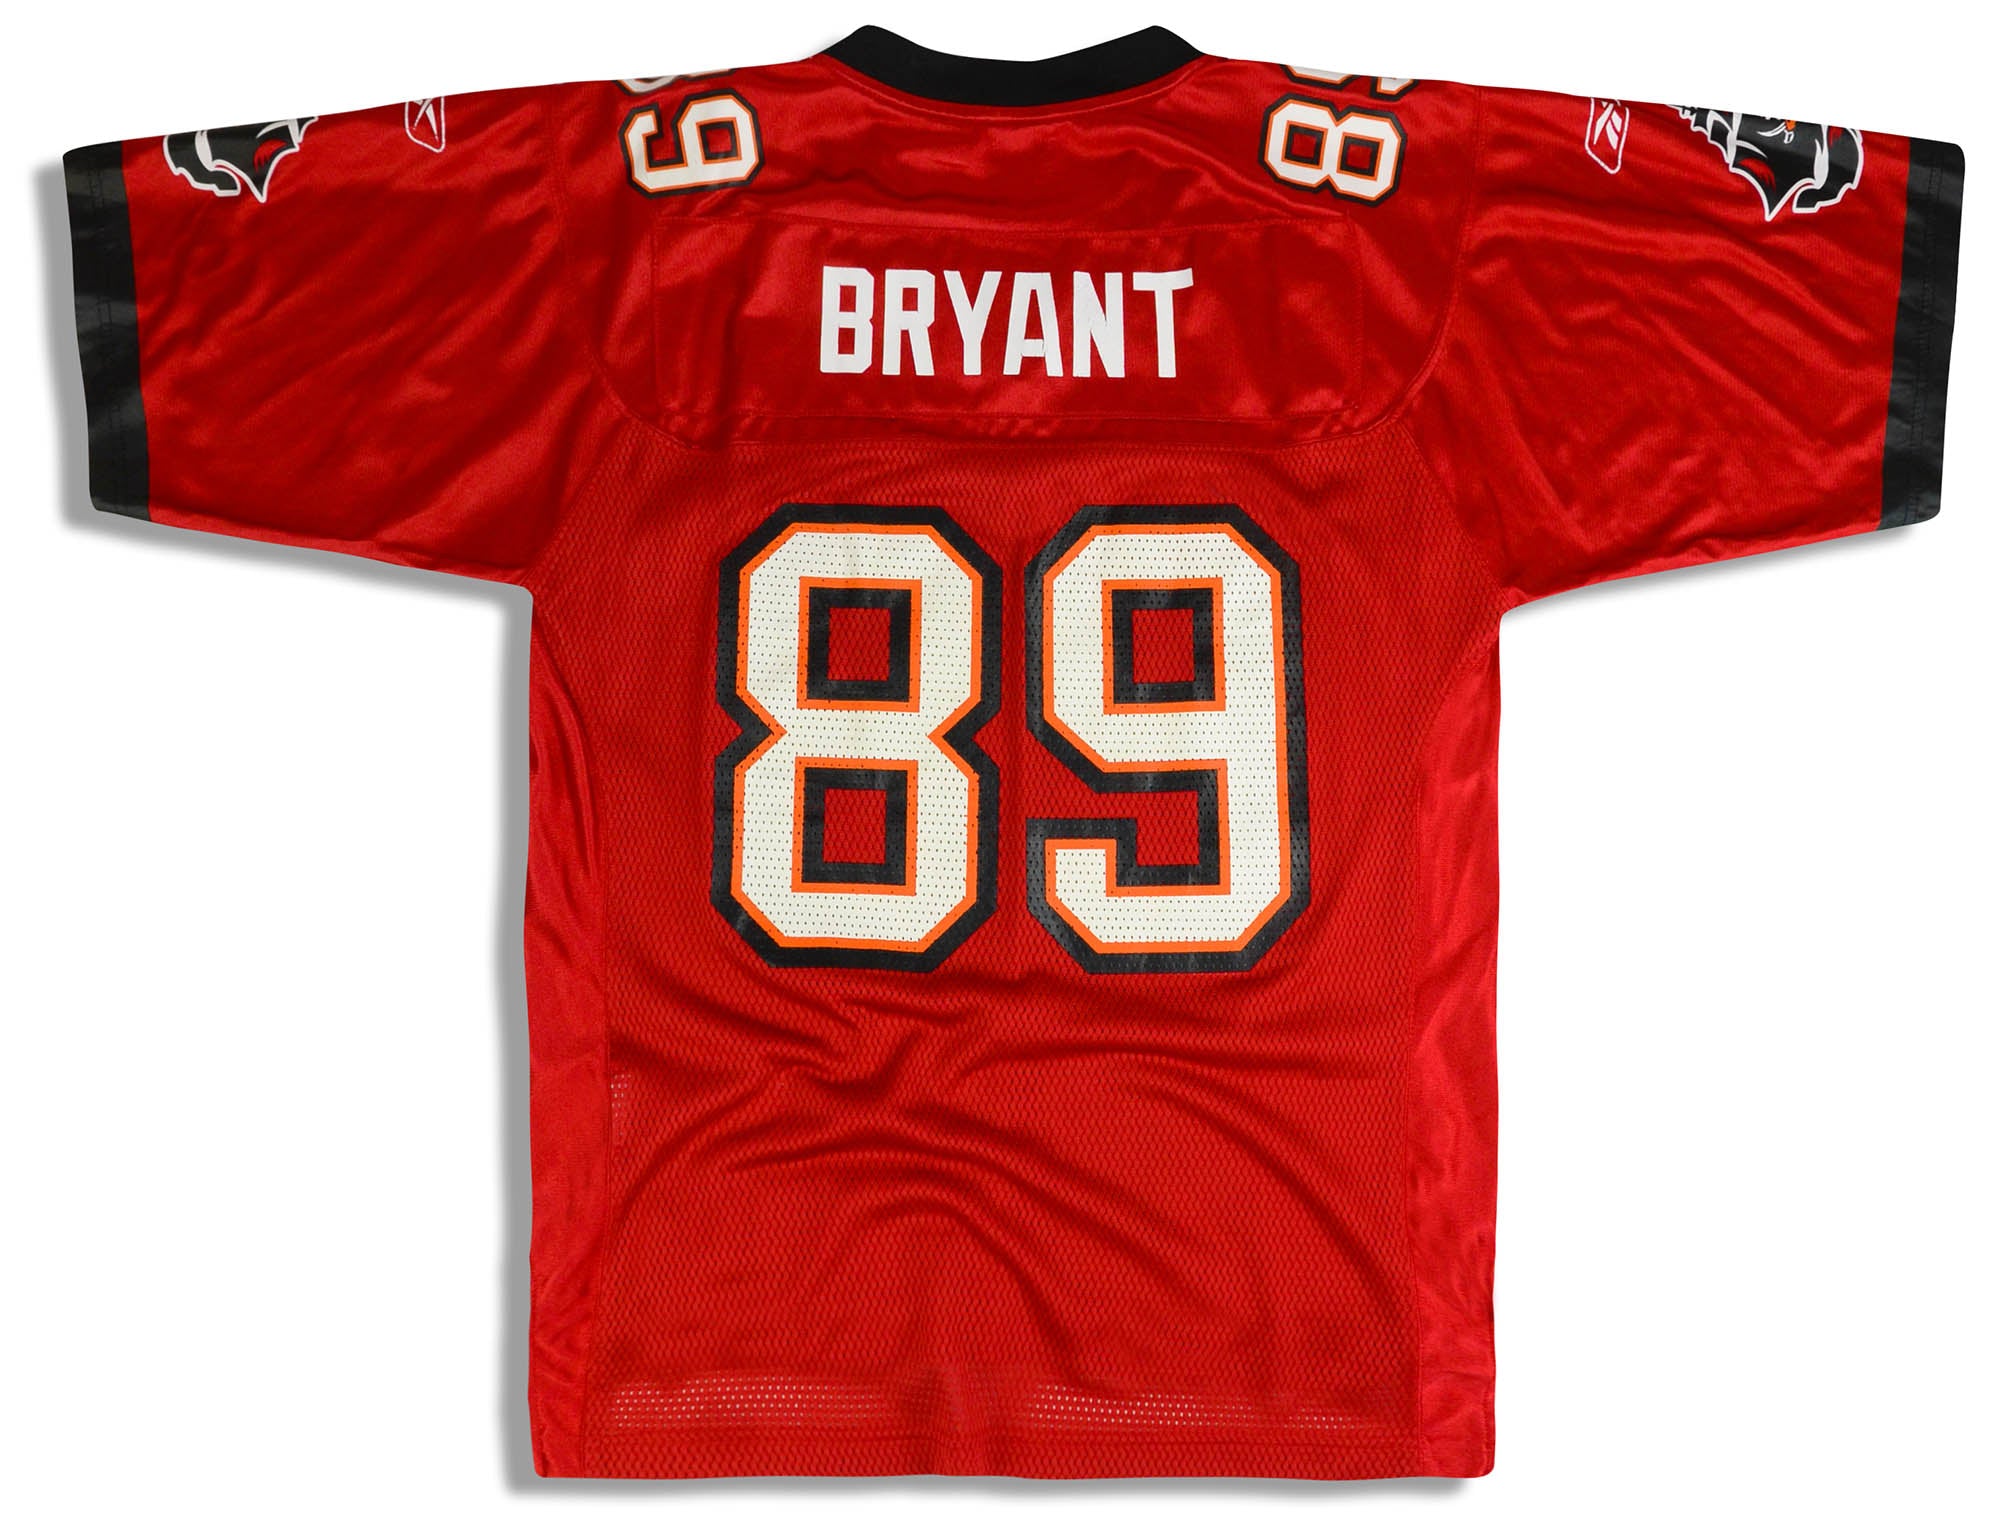 2008-09 TAMPA BAY BUCCANEERS BRYANT #89 REEBOK ON FIELD JERSEY (HOME) M